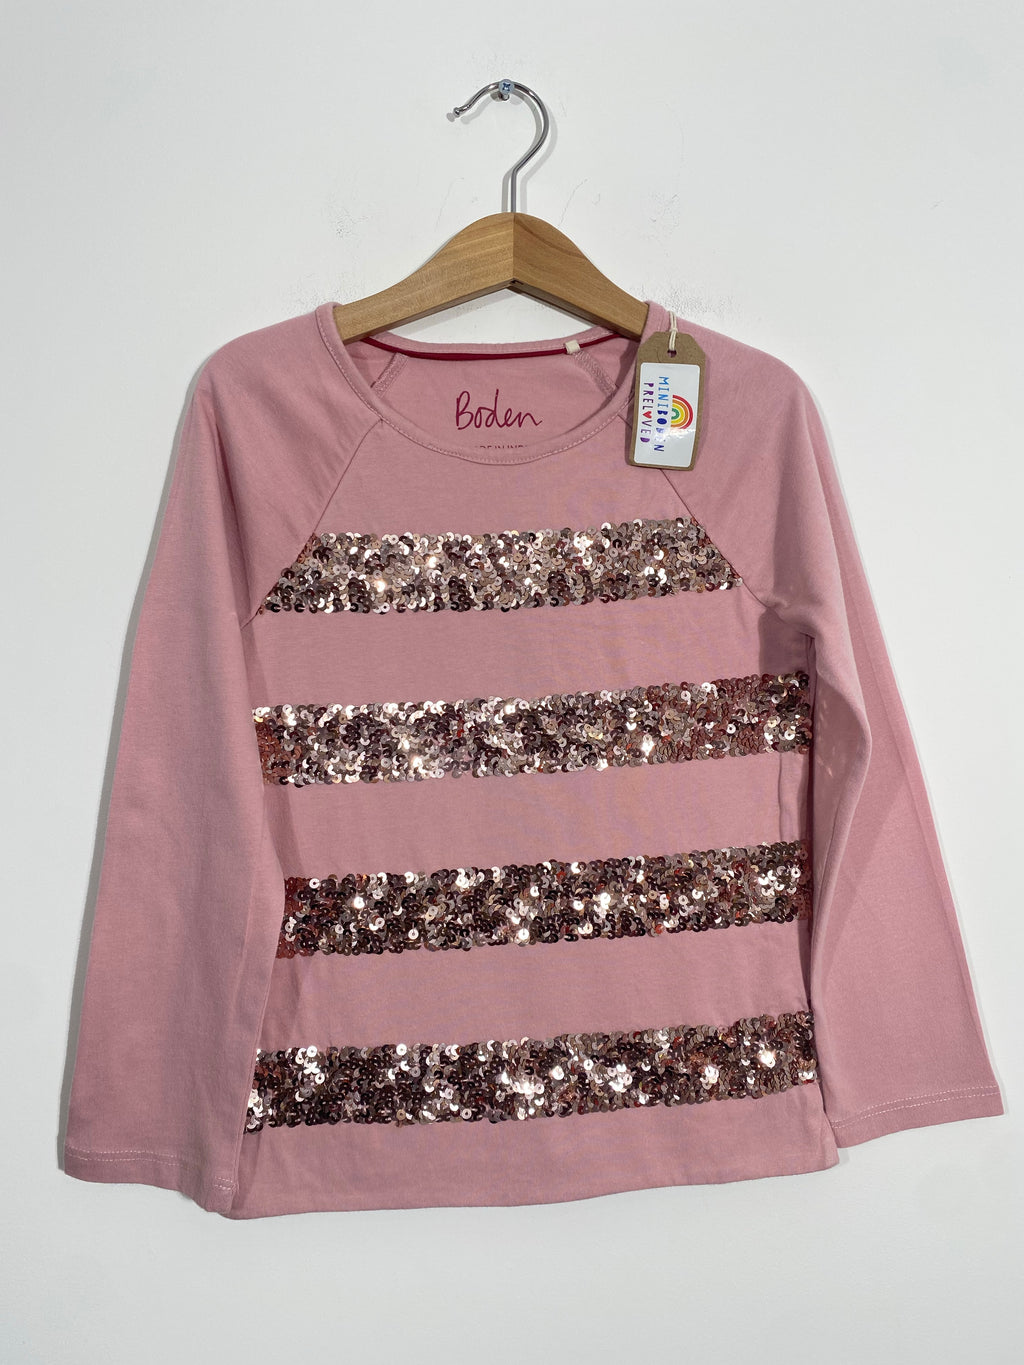 Fabulous Pale Pink Sequin Party Top (5-6 Years)